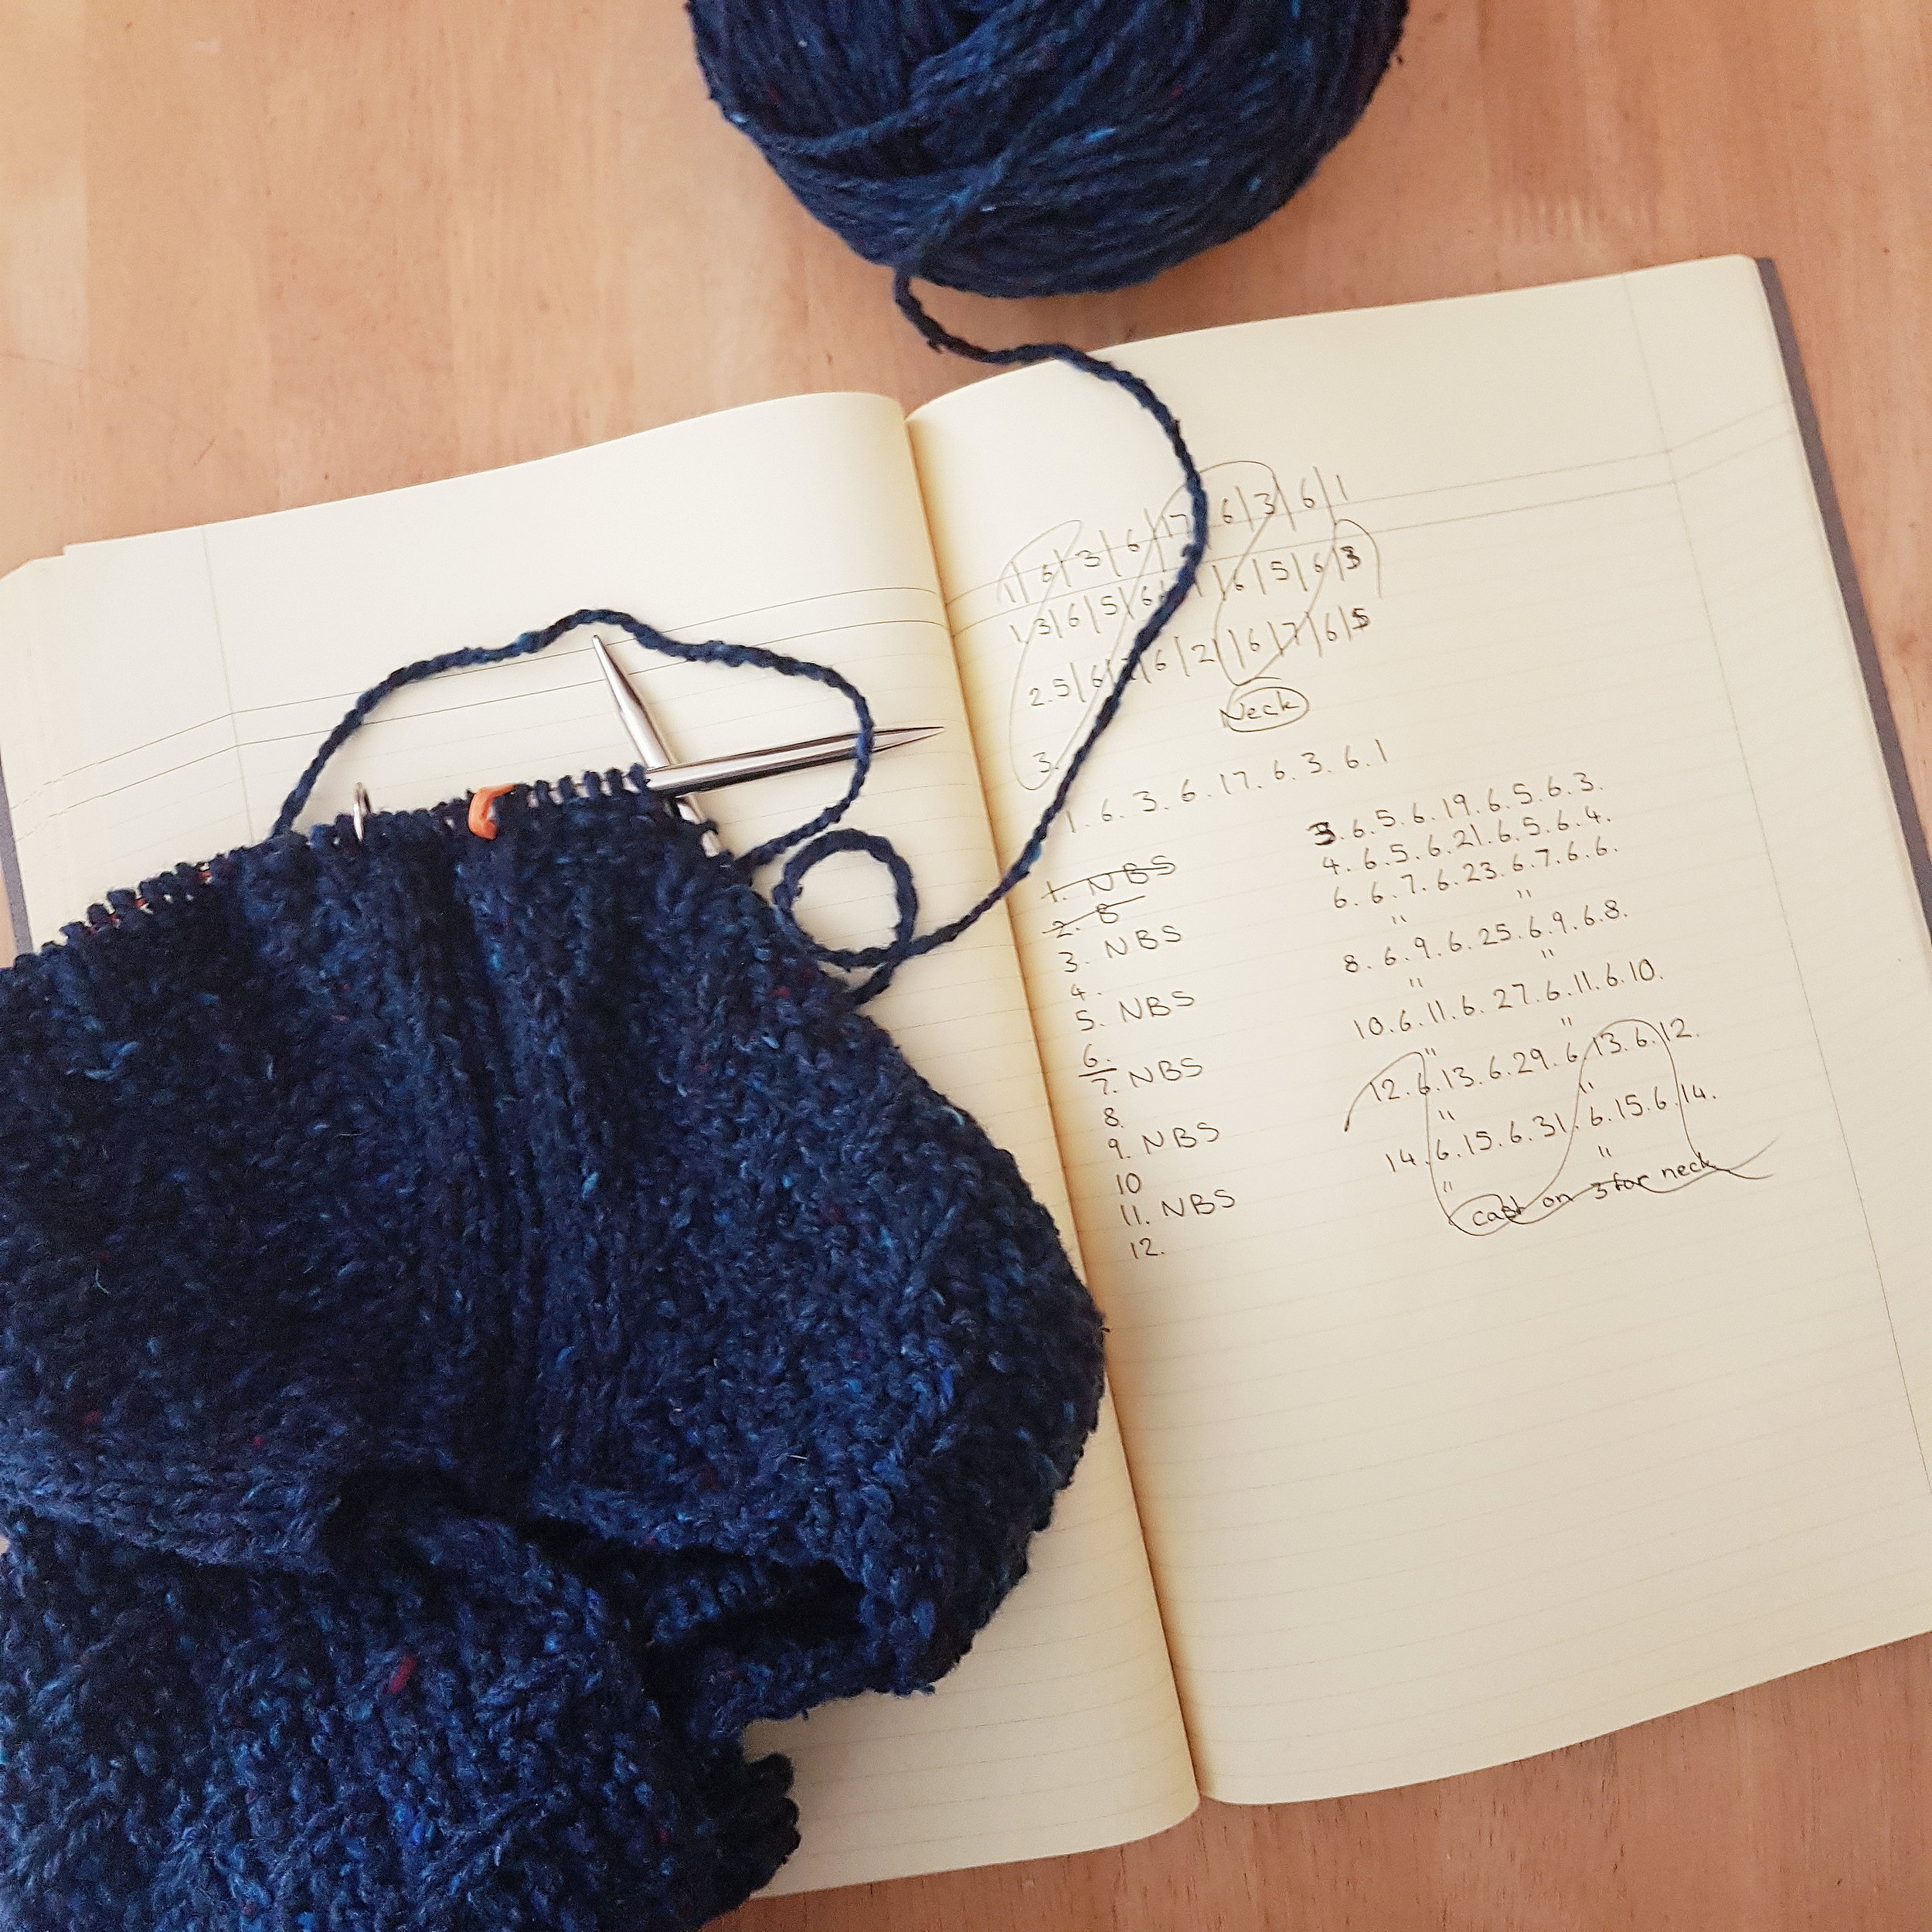 Knitting information, opinions, and more!